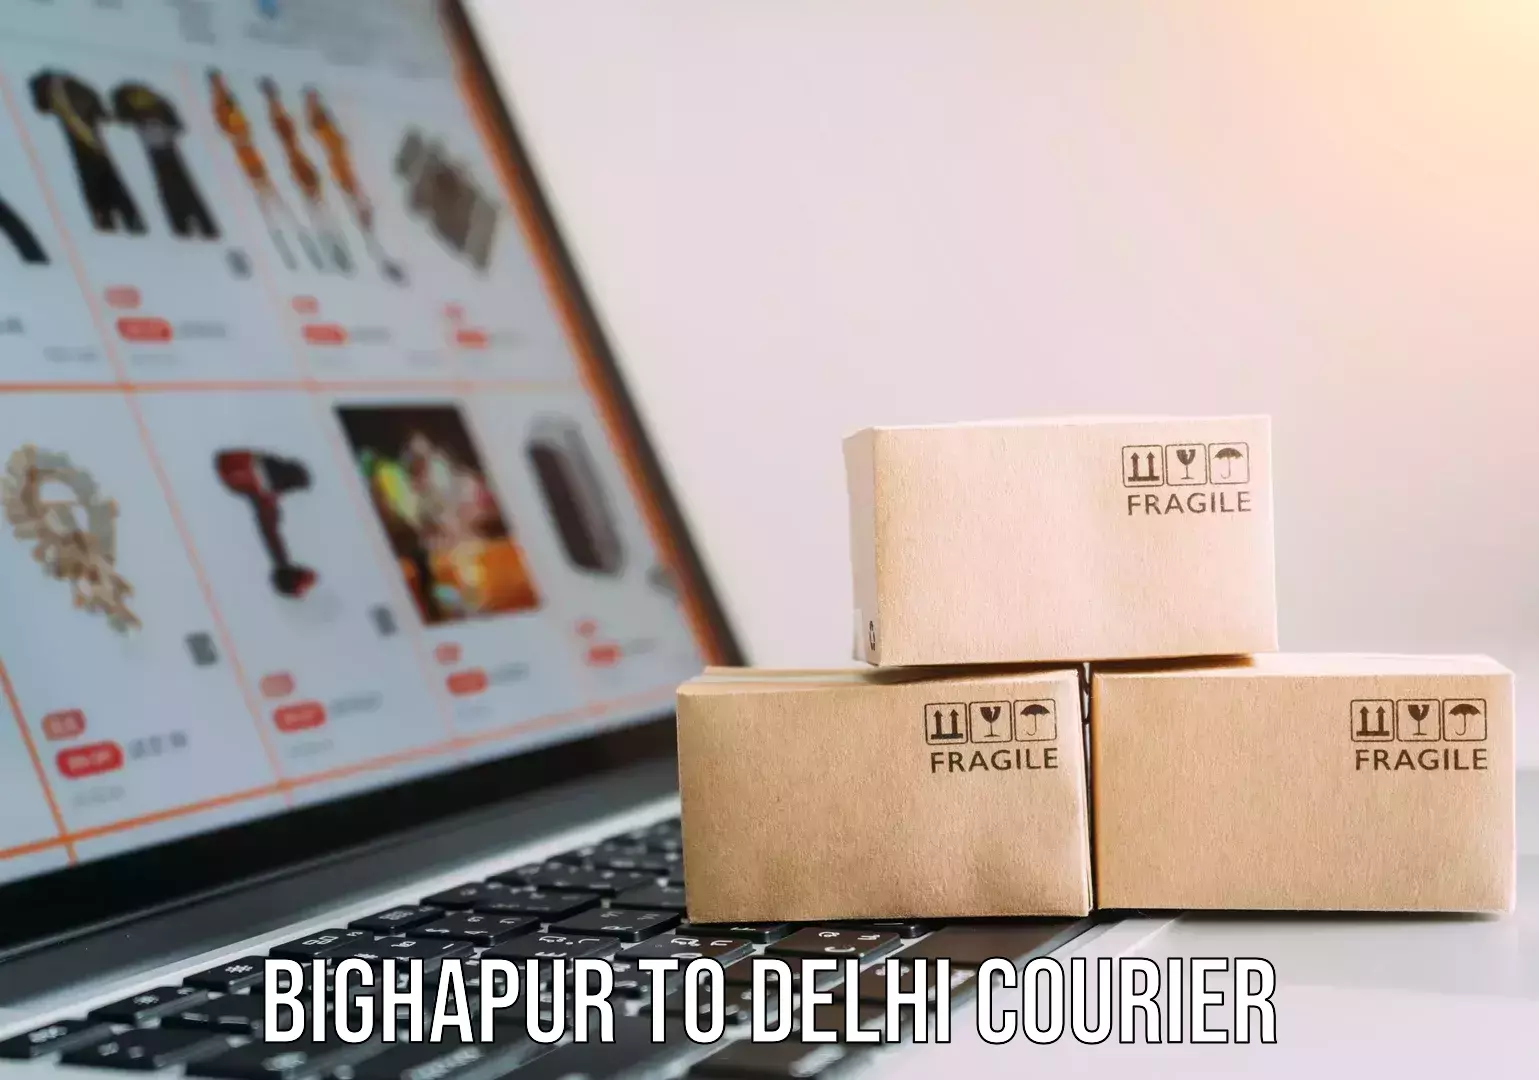 Postal and courier services Bighapur to Delhi